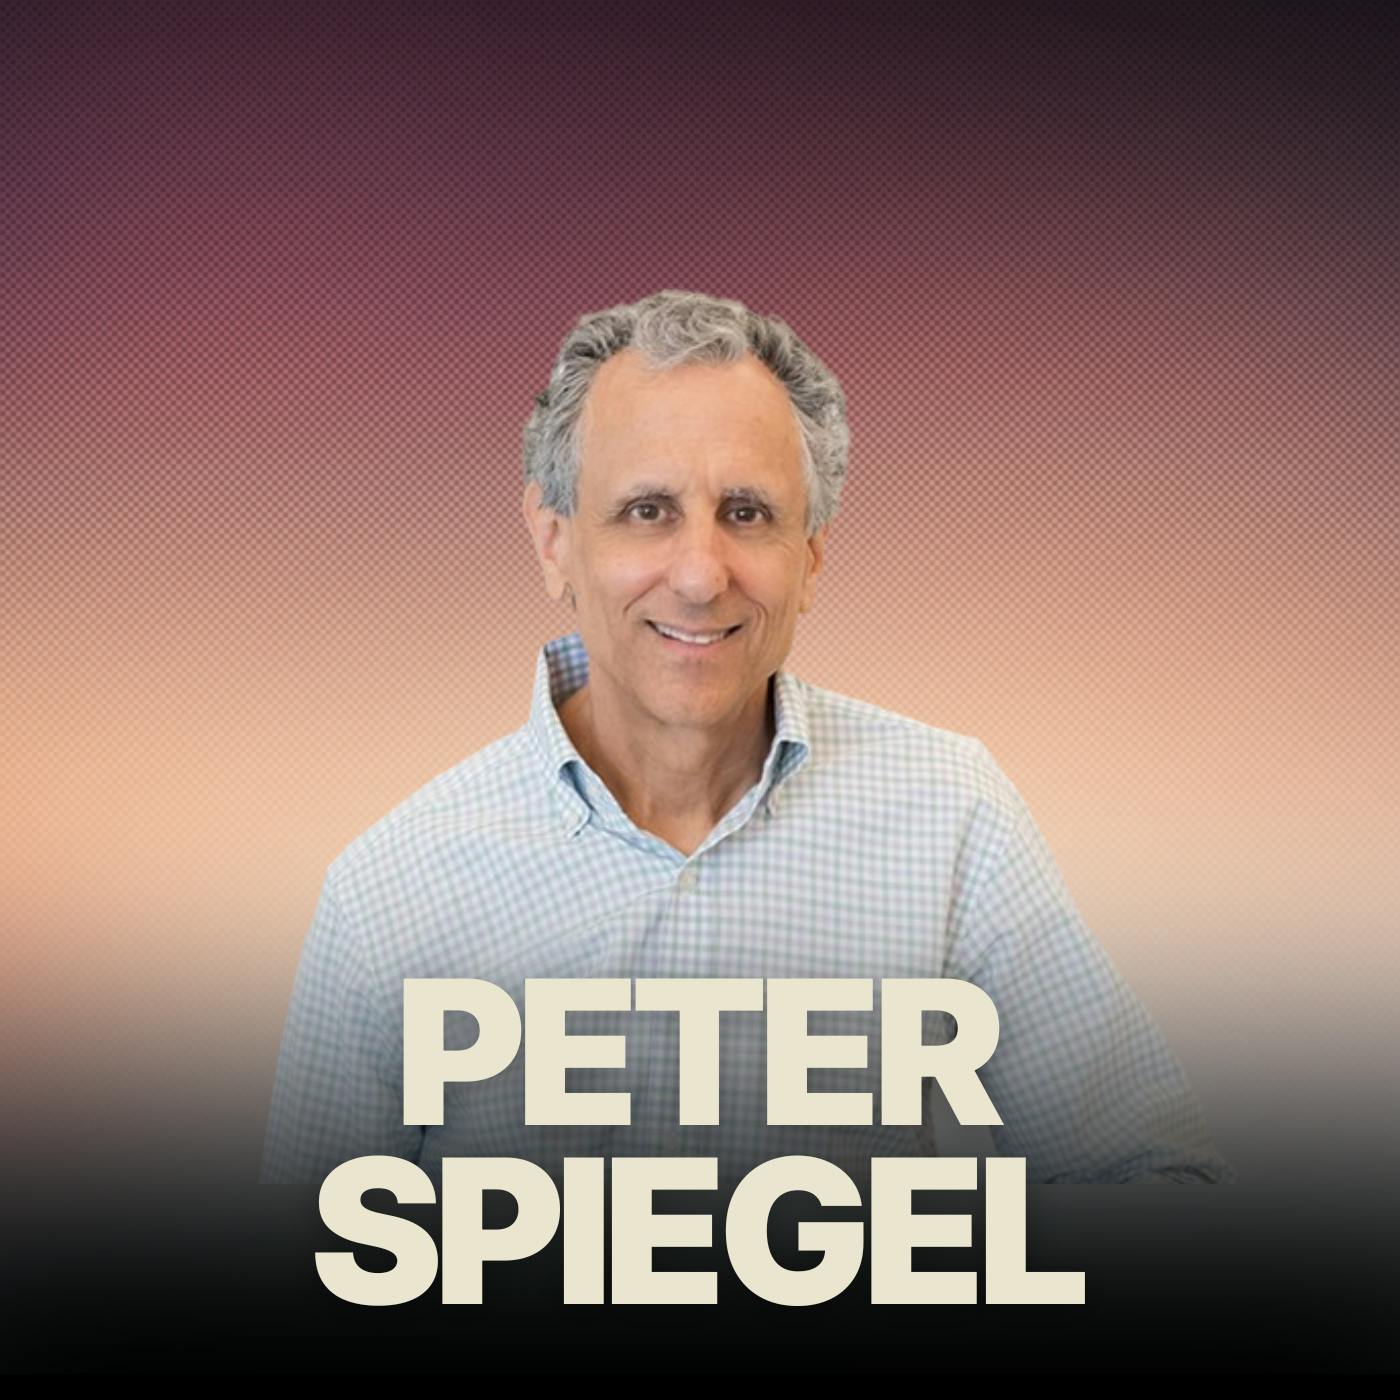 Clean Air & Water Crusador Peter Spiegel | How To Protect What You Breathe & Drink